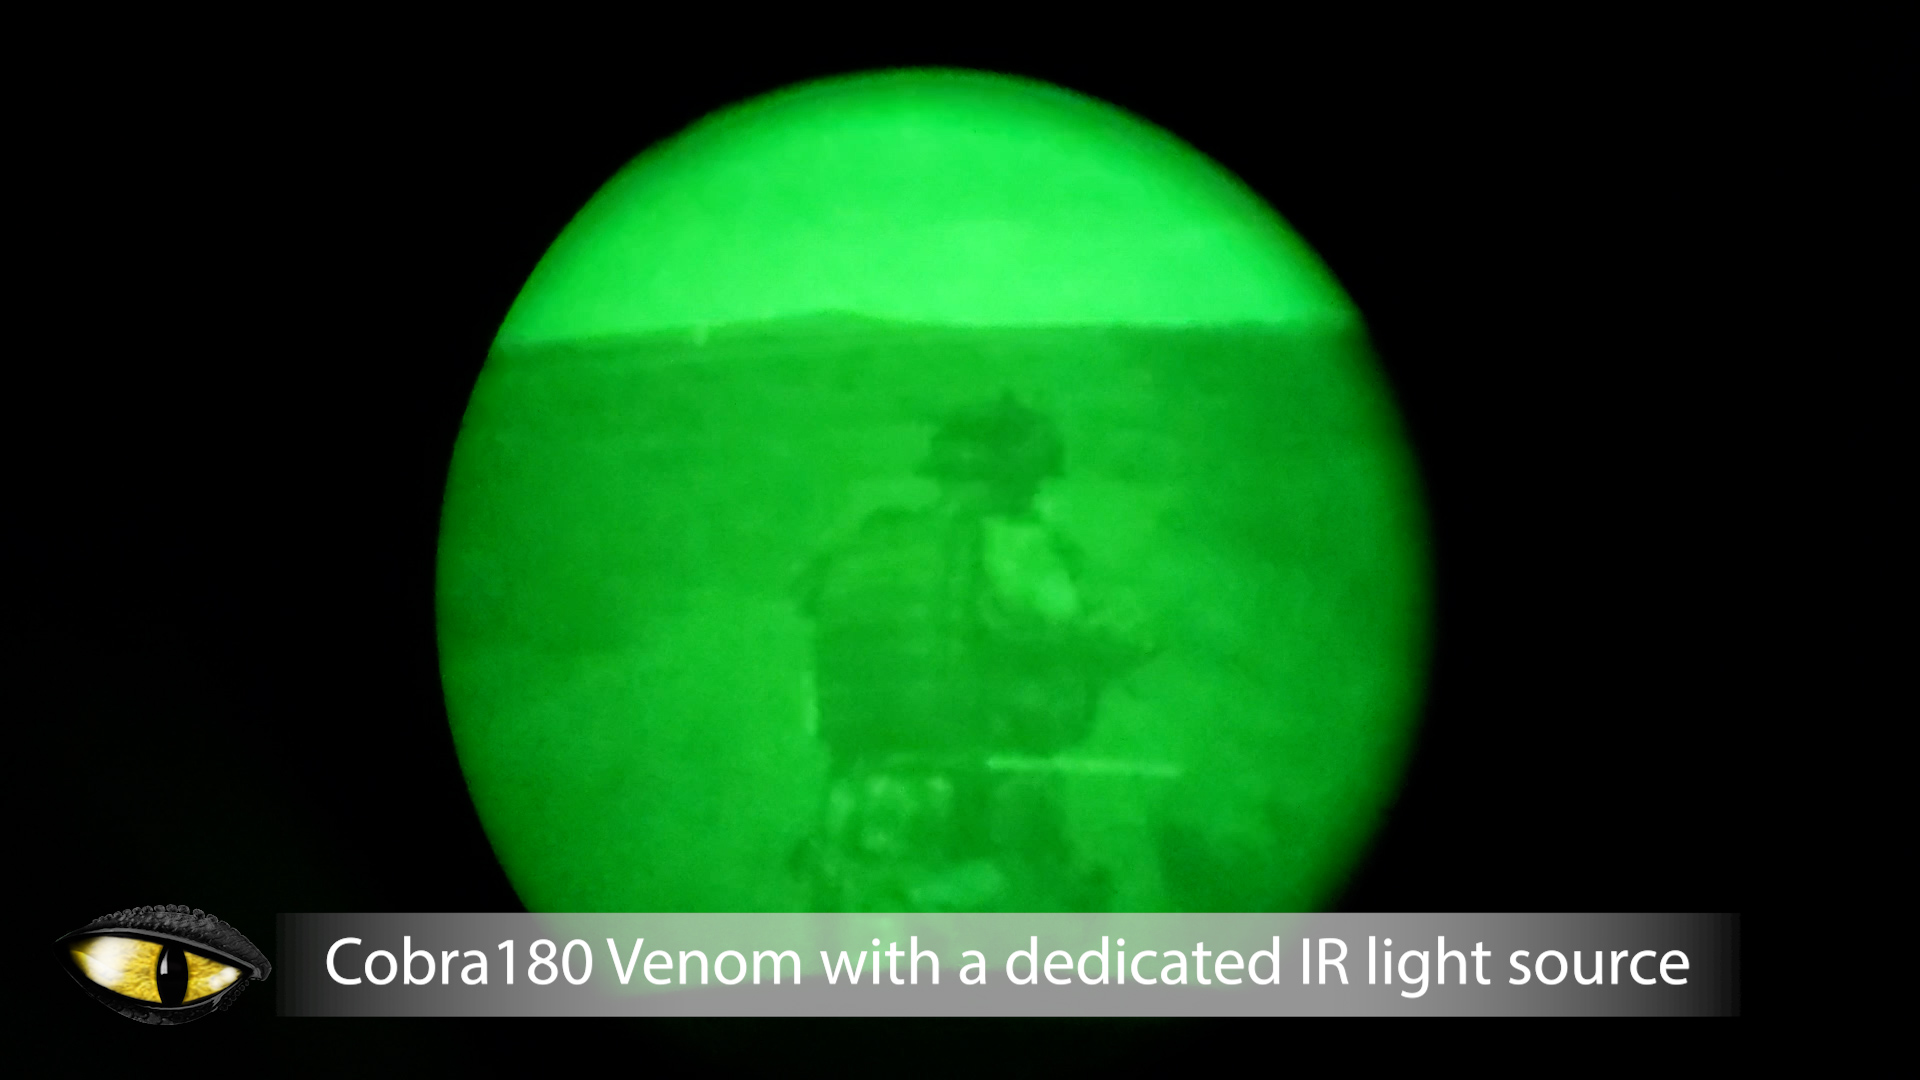 Cobra demonstrates NVG capability on small footprint dome